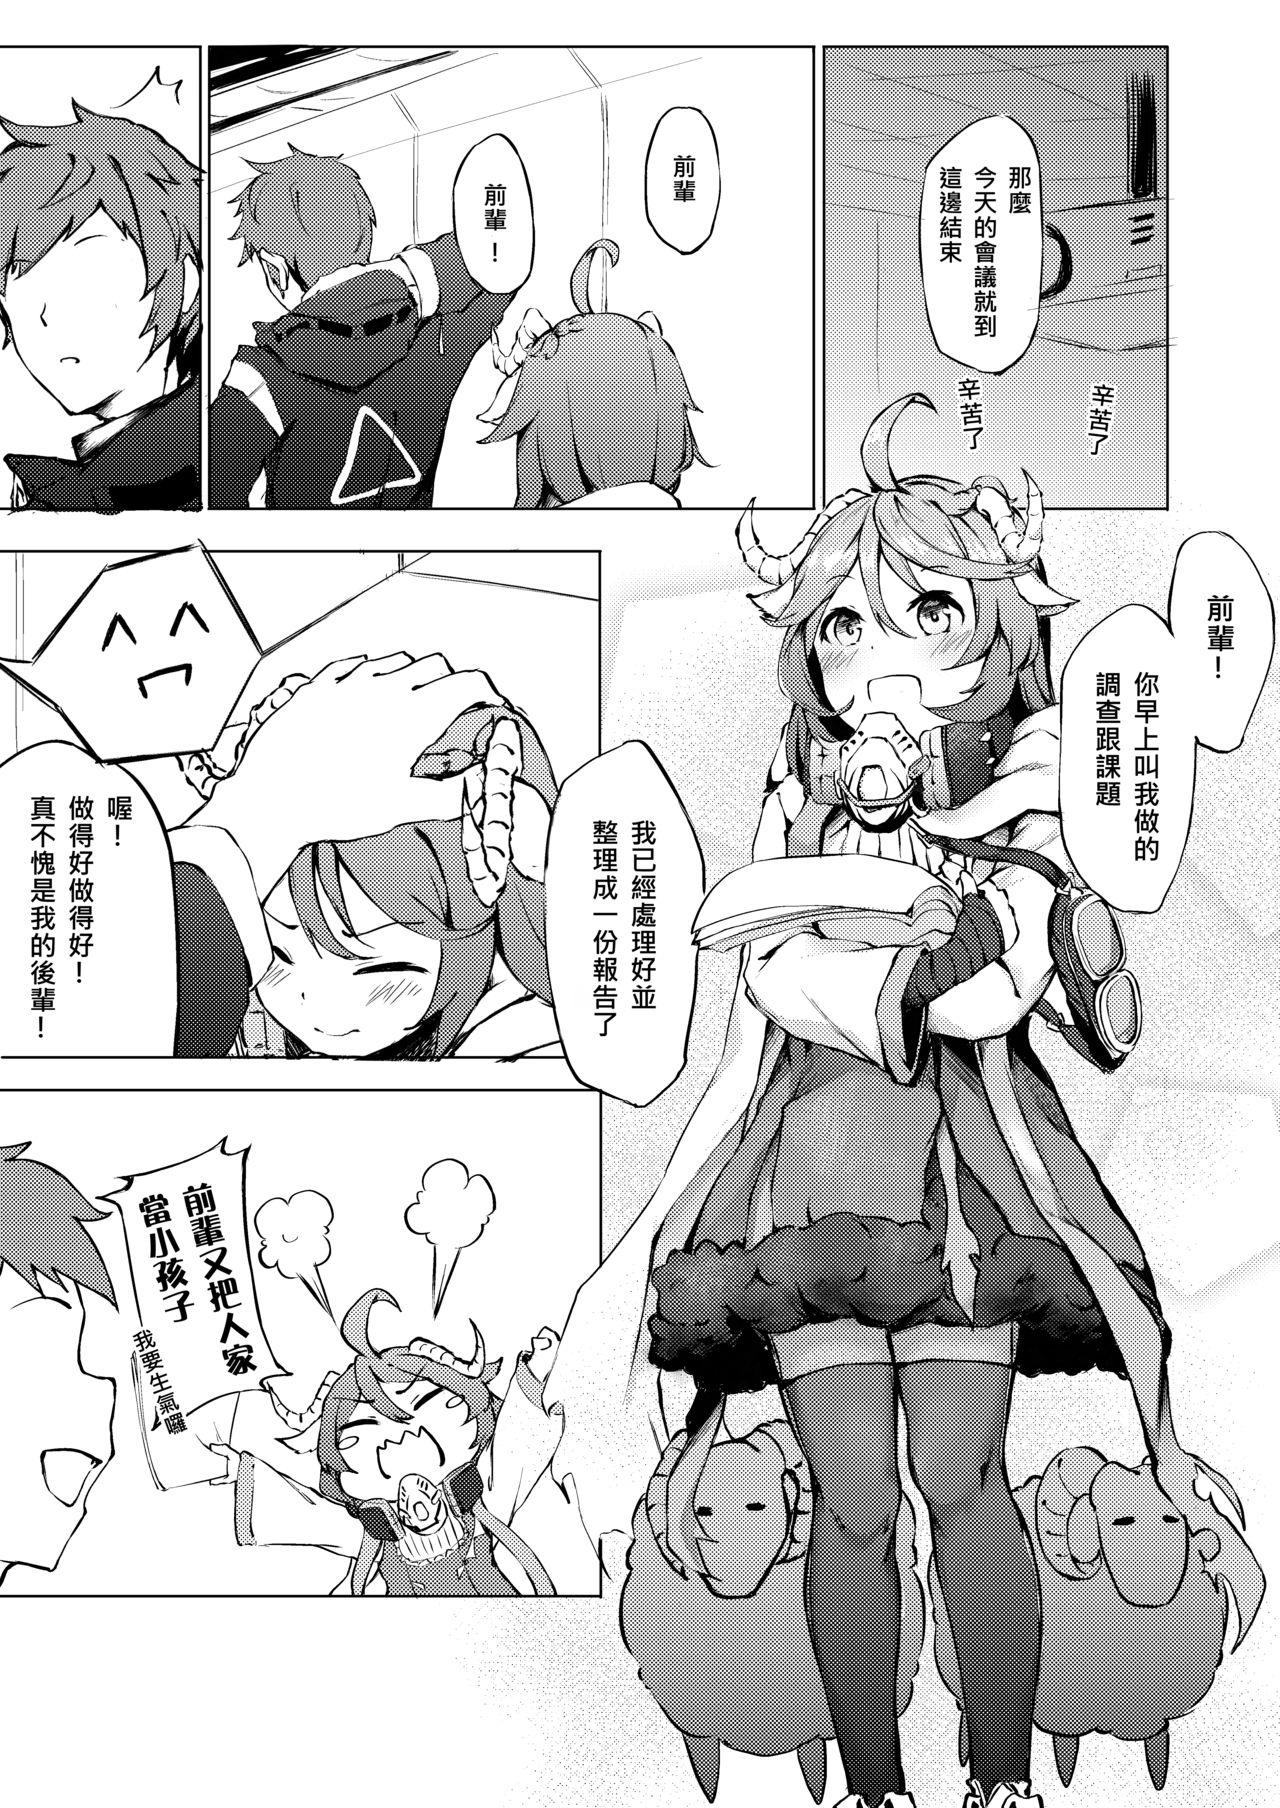 Sucks 不存在的聲音 | The Nonexistence Voice - Arknights Banho - Page 5